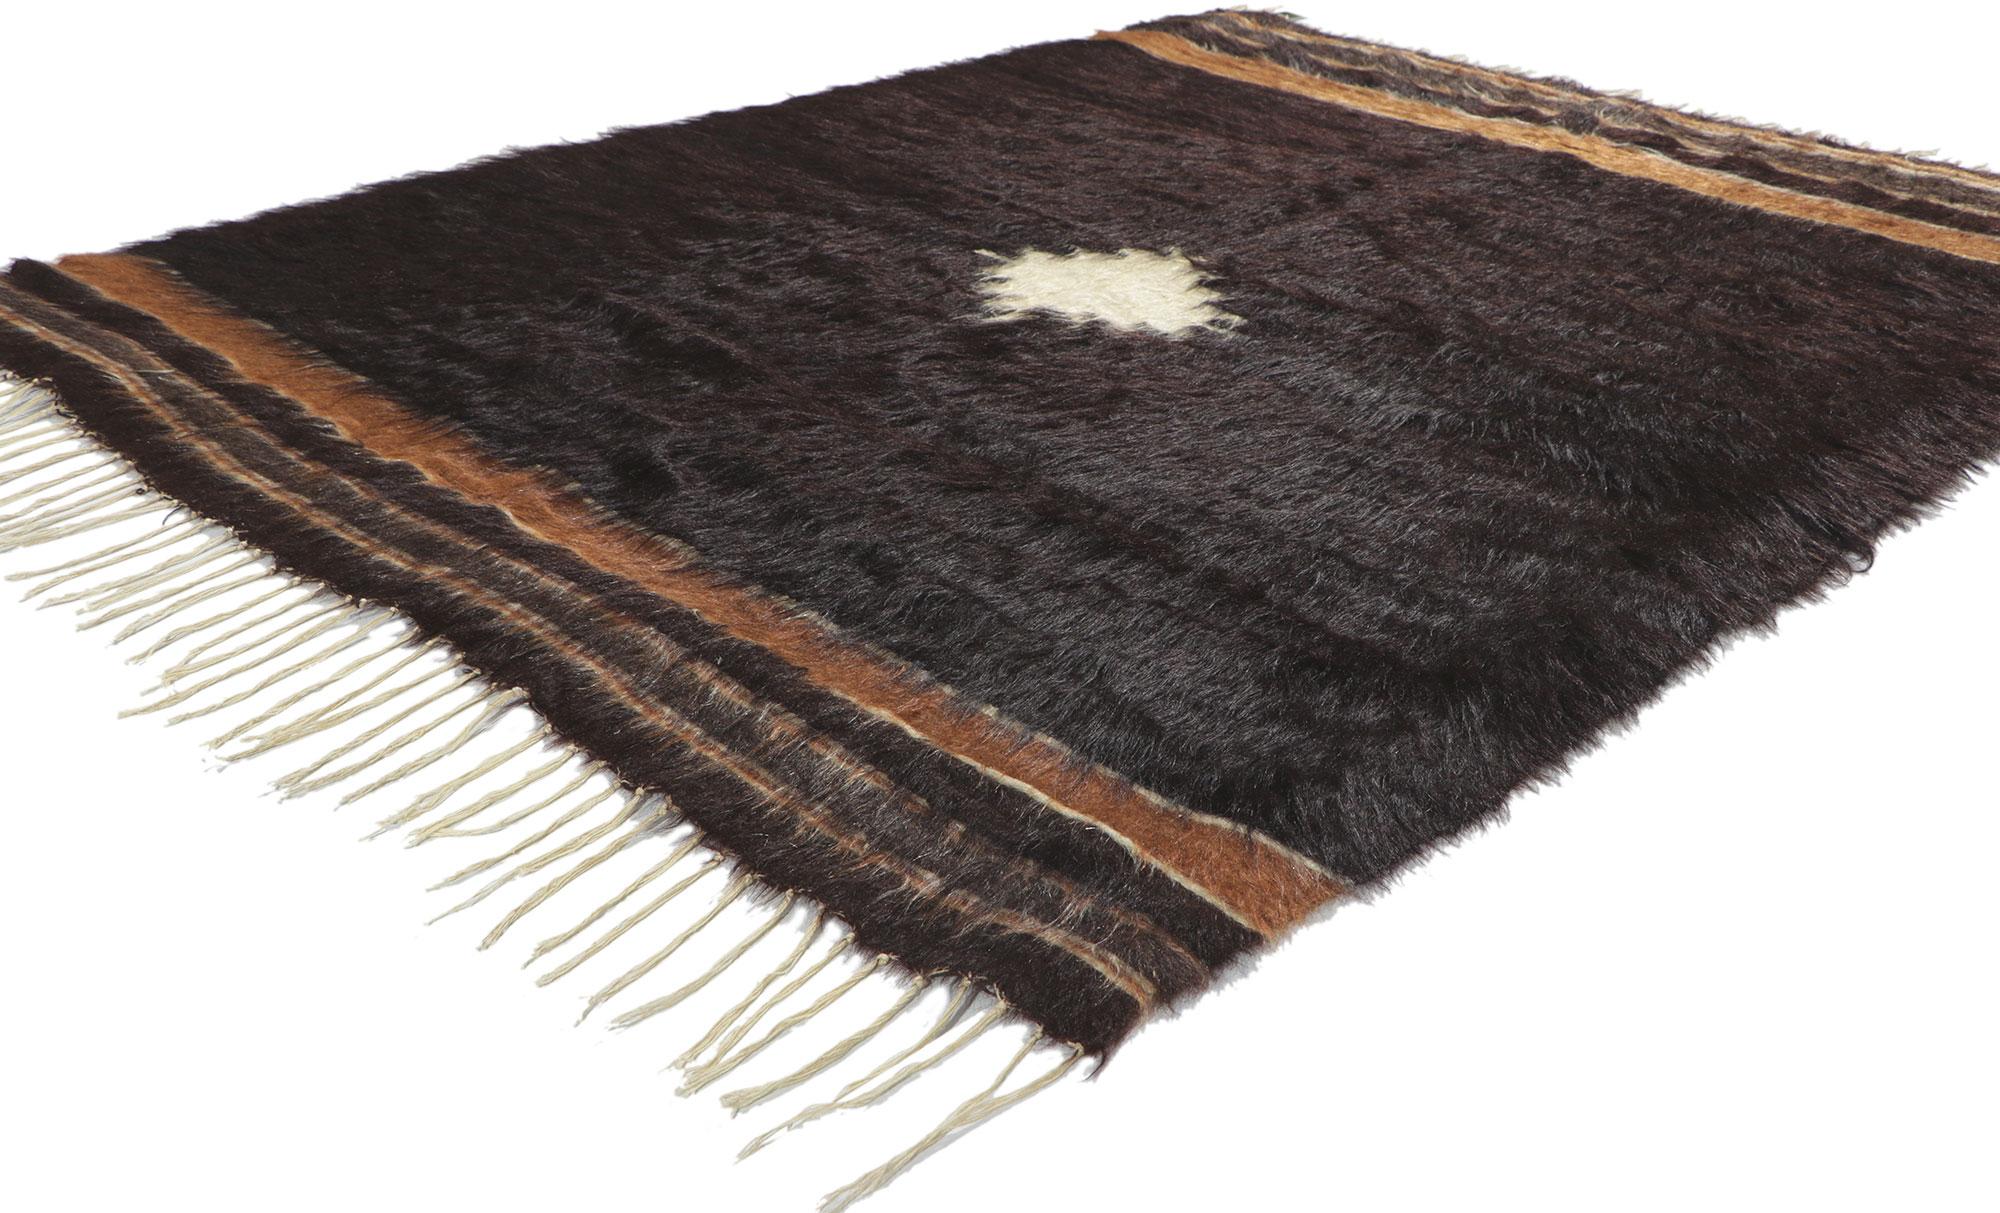 53836 Vintage Turkish Angora Wool Kilim Blanket Rug, 04'03 x 05'07. With its shaggy pile, incredible detail and texture, this handwoven Turkish angora kilim rug is a captivating vision of woven beauty. The eye-catching geometric design and earthy